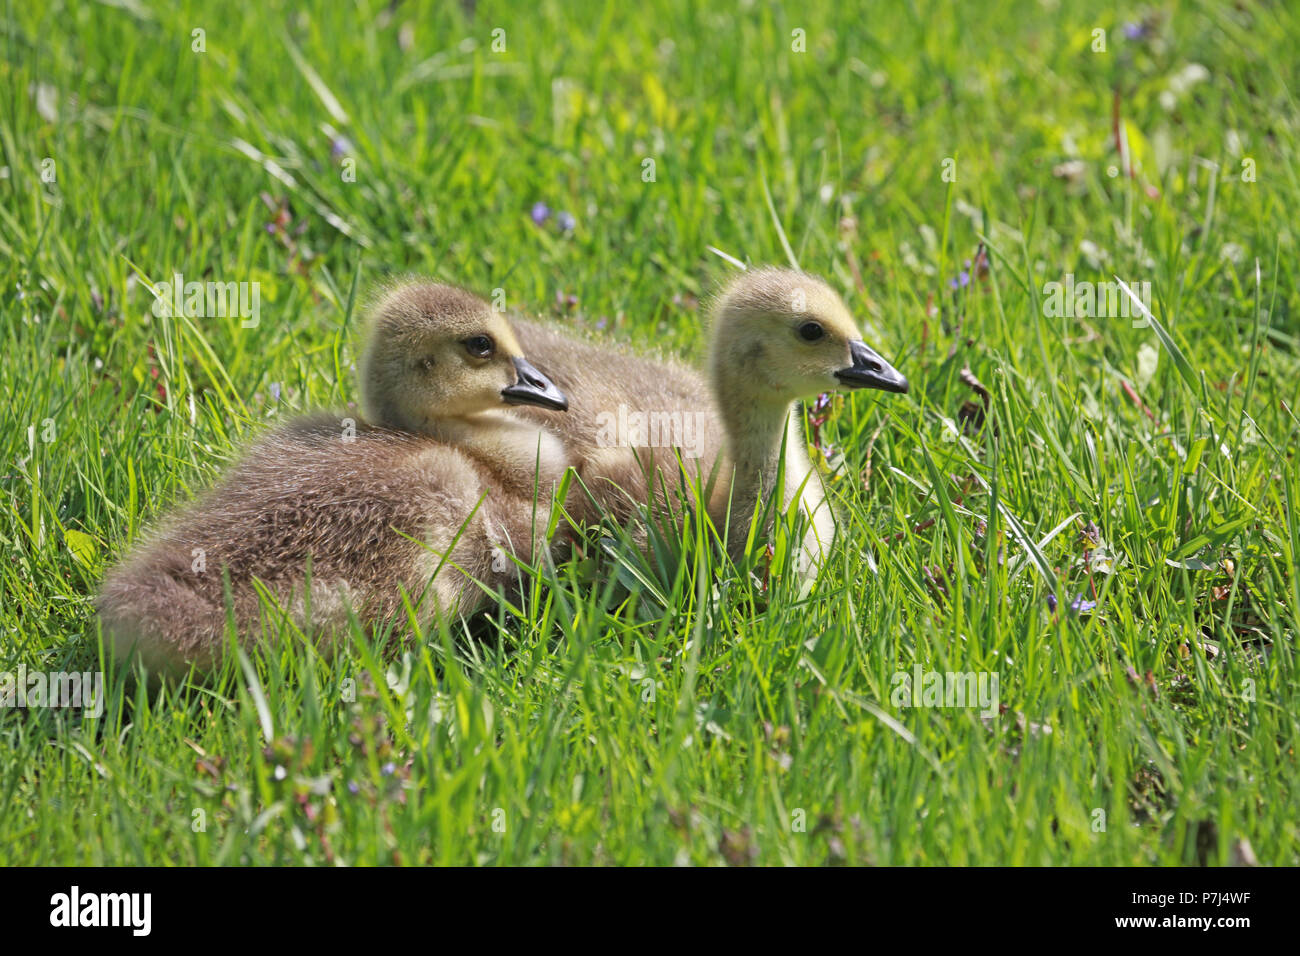 Two goslings relaxing in green grass patiently waiting for mama to return Stock Photo